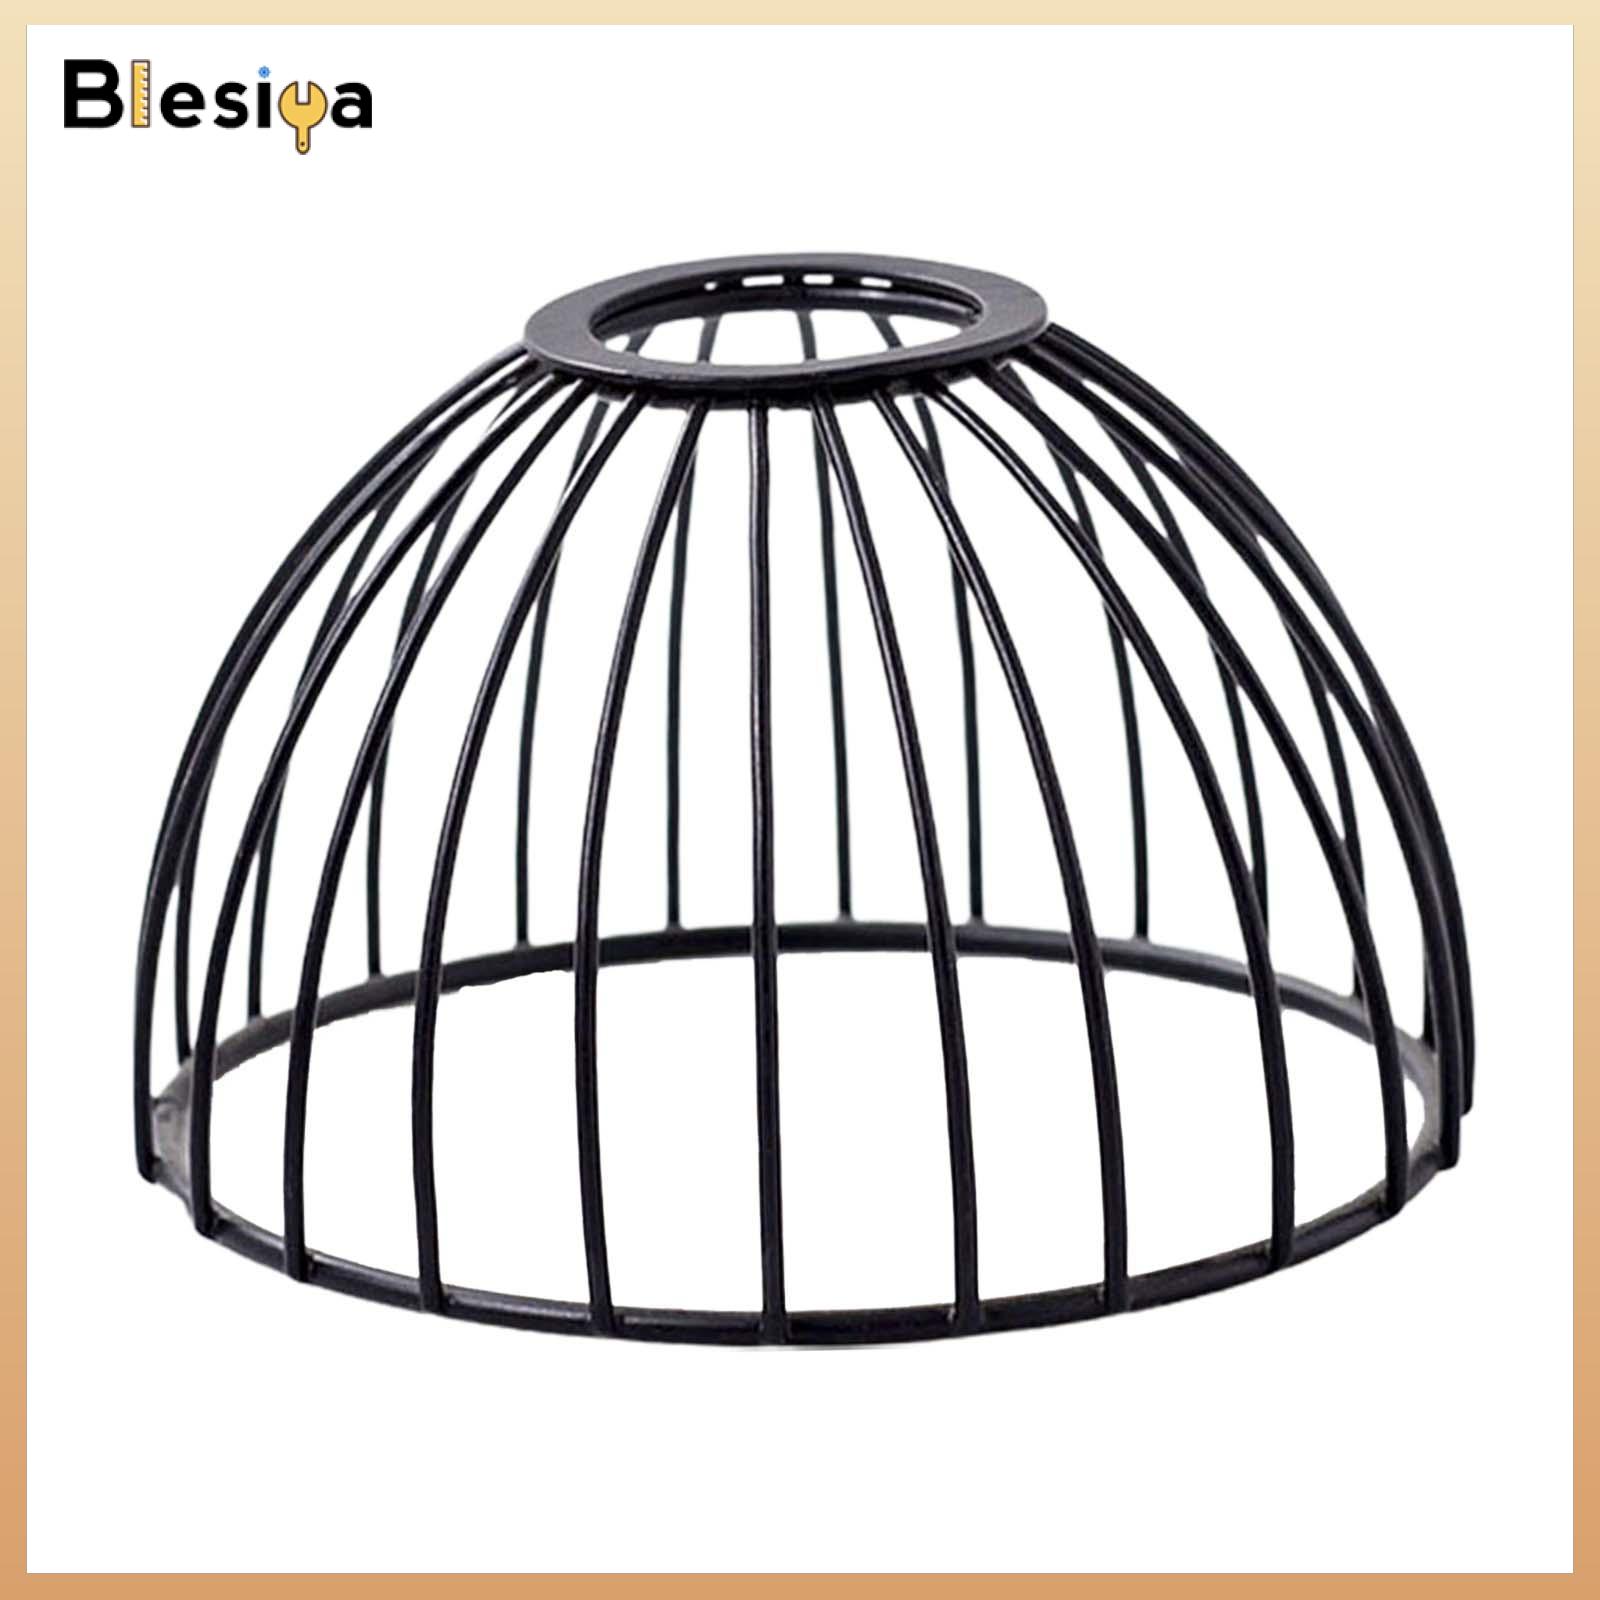 Blesiya Wrought Iron Lampshade Lamp Cover Sturdy for Bar Household Dining